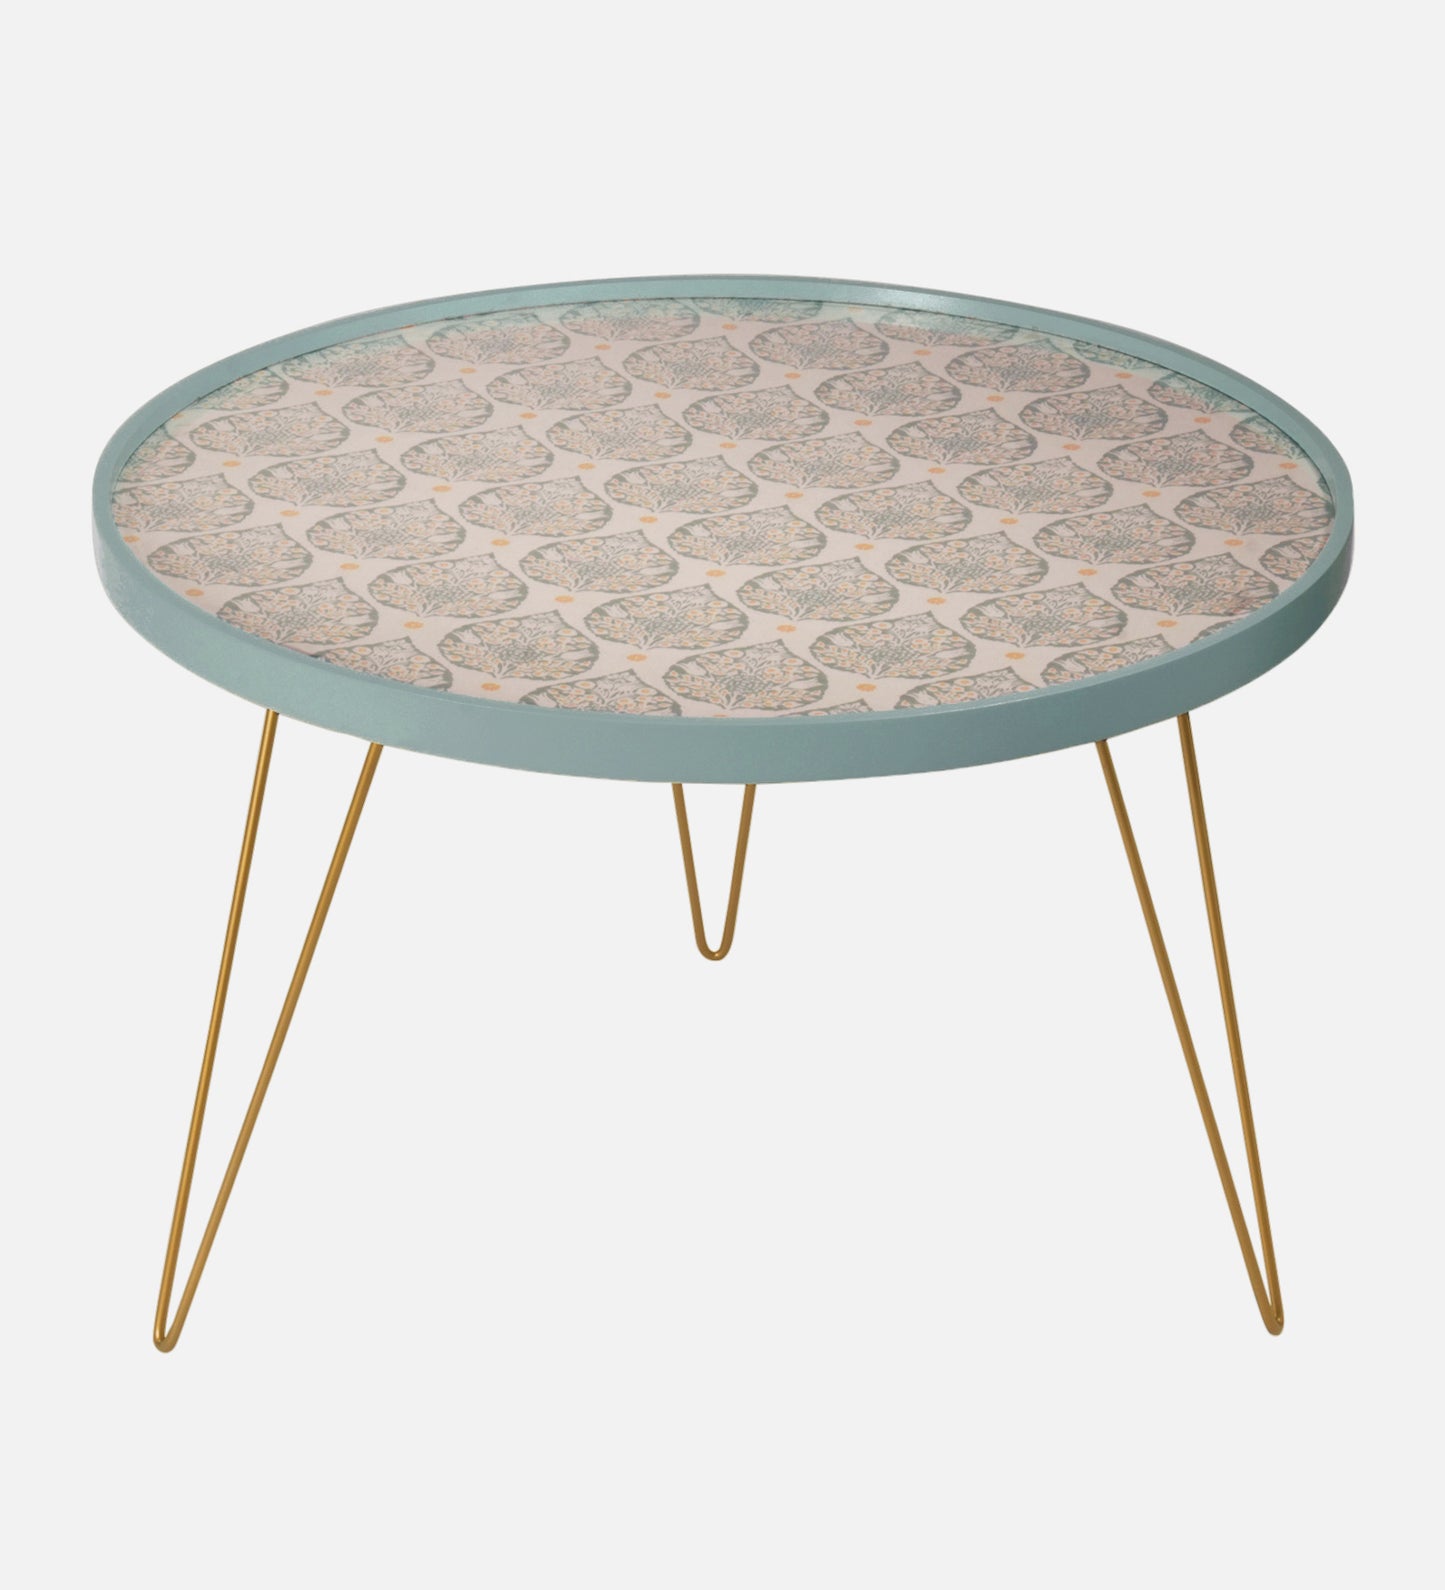 Vriksha Round Coffee Tables, Wooden Tables, Coffee Tables, Center Tables, Living Room Decor by A Tiny Mistake